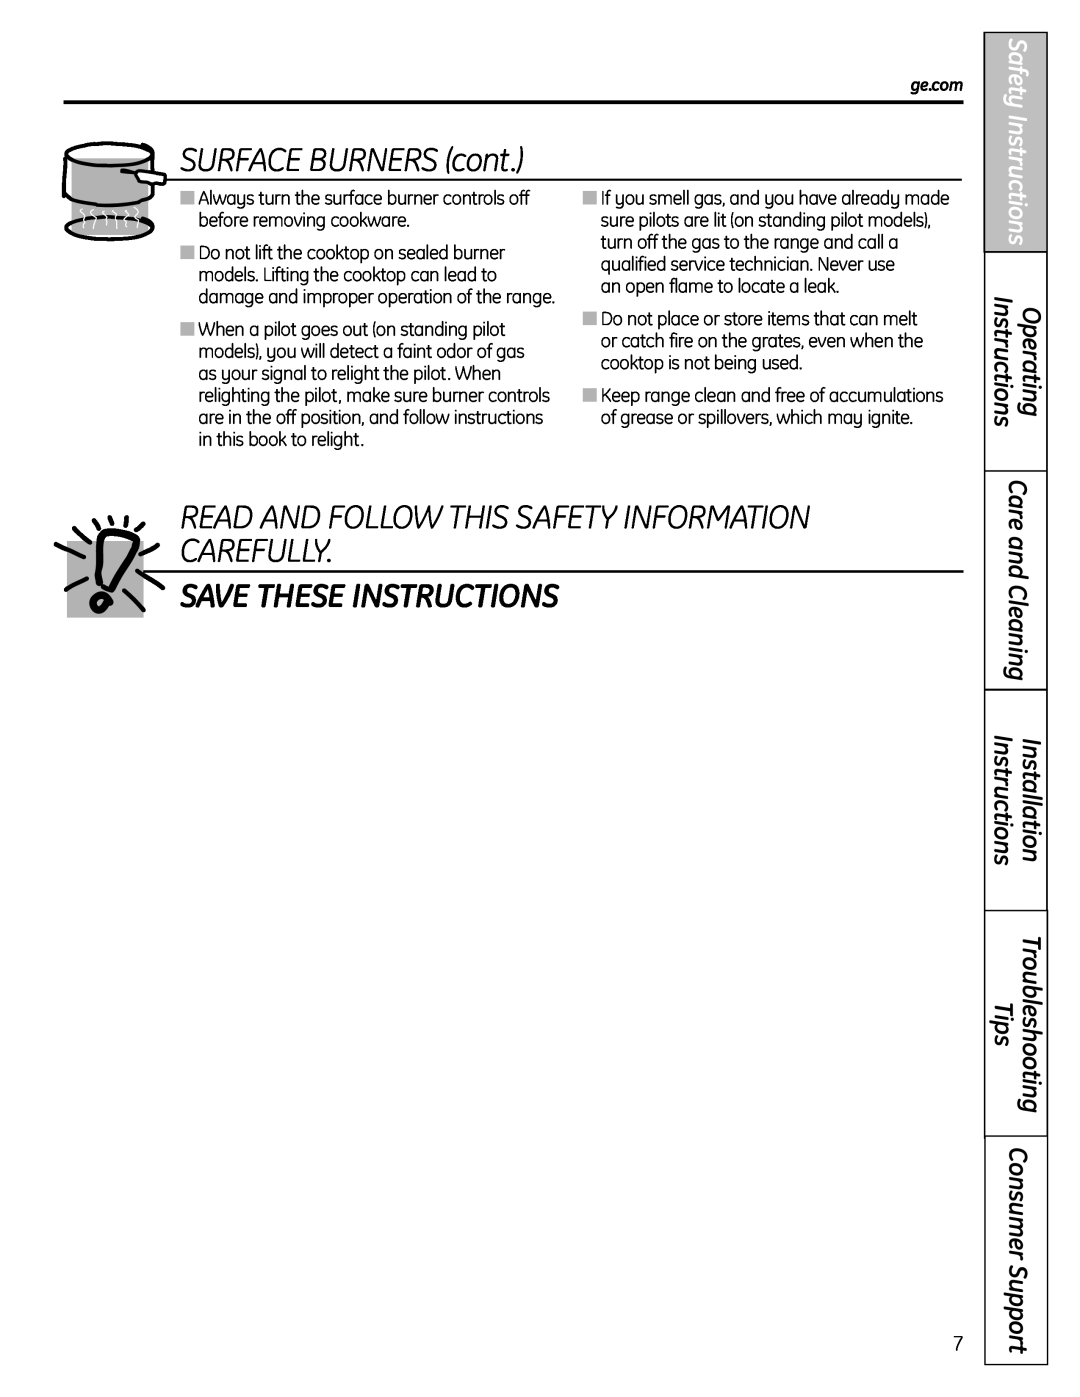 GE JGBS19 SURFACE BURNERS cont, Save These Instructions, Safety Instructions, Operating, Tips, Installation, ge.com 